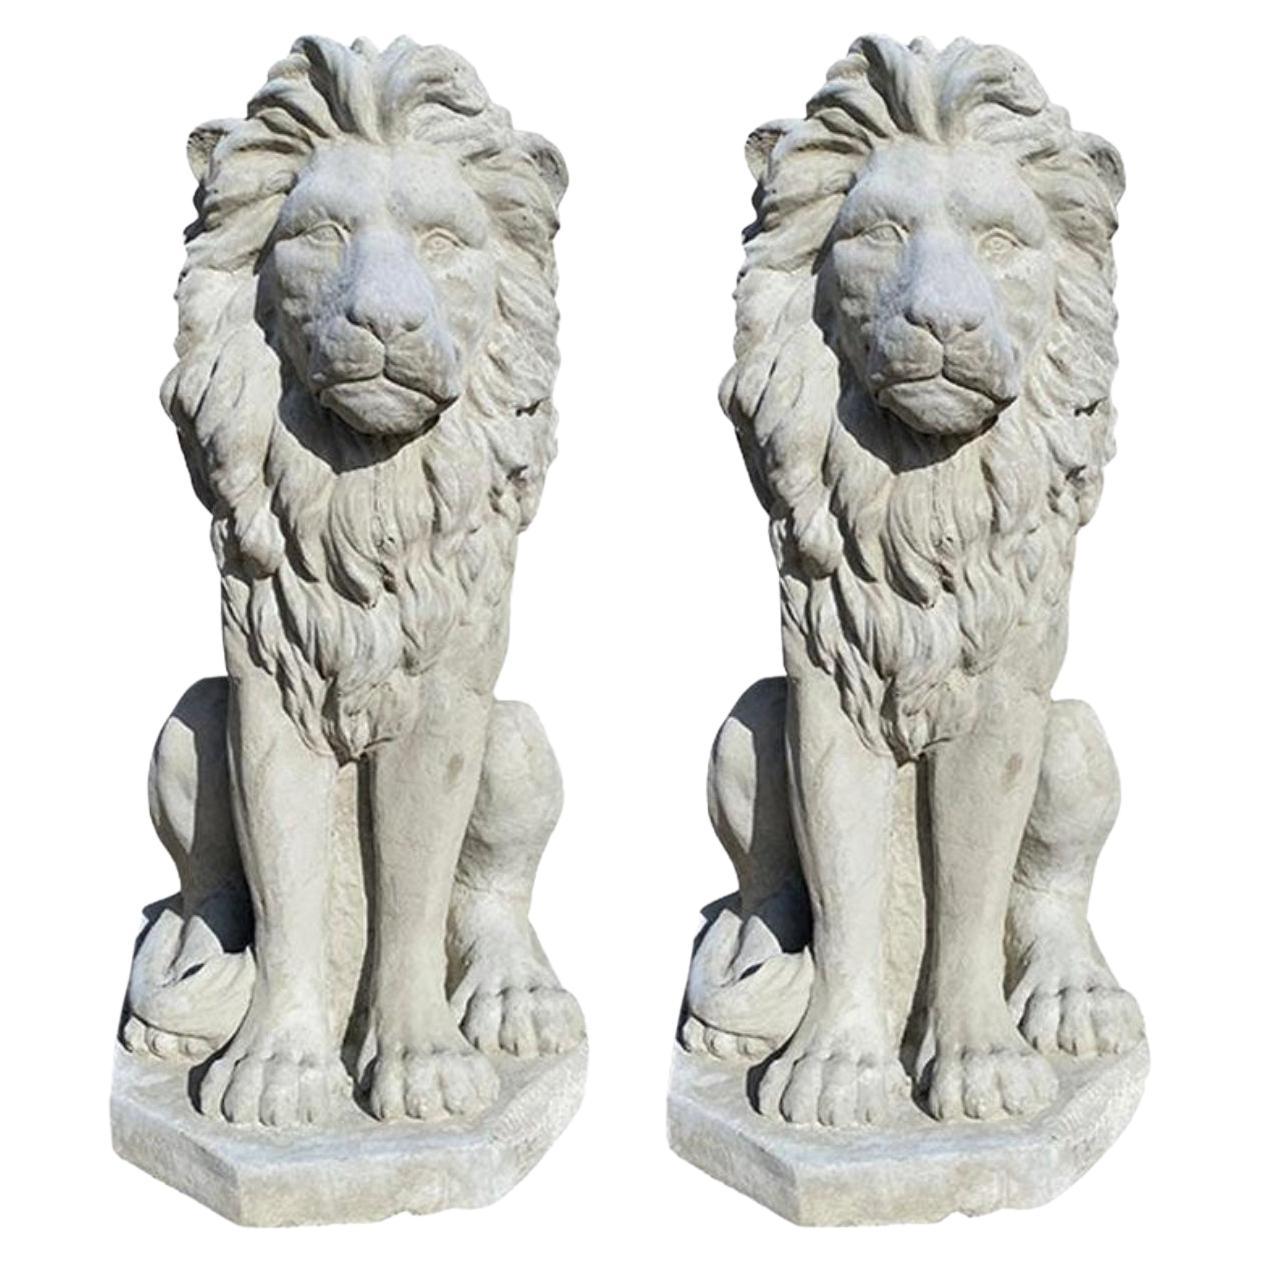 Two Large Tall Architectural Sitting Stone Concrete Lions, a Pair